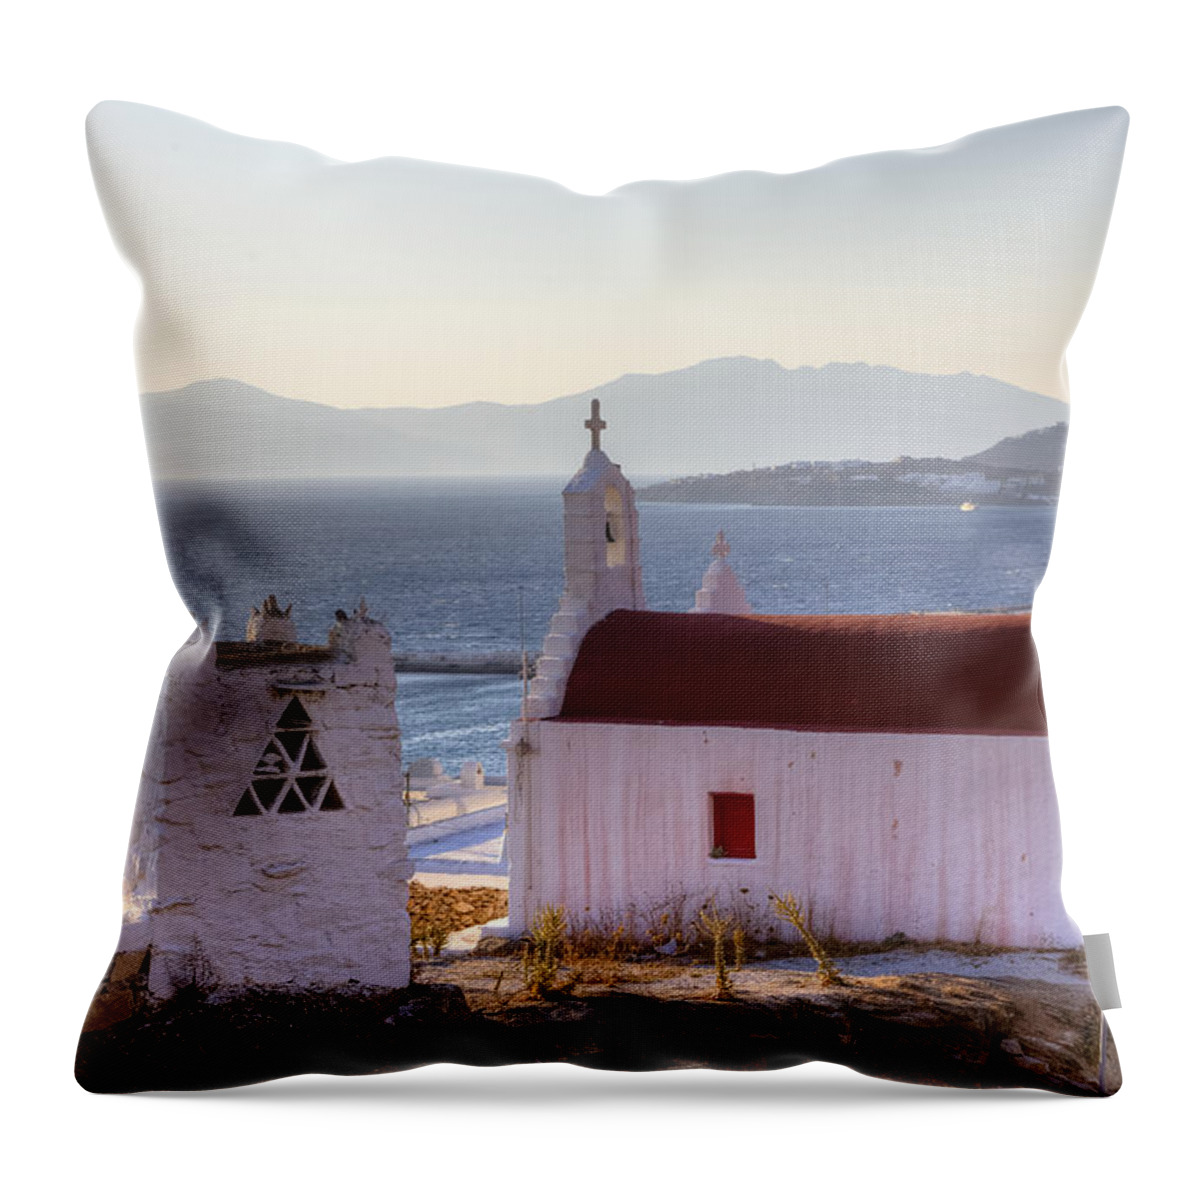 Ano Myli Throw Pillow featuring the photograph Mykonos #6 by Joana Kruse